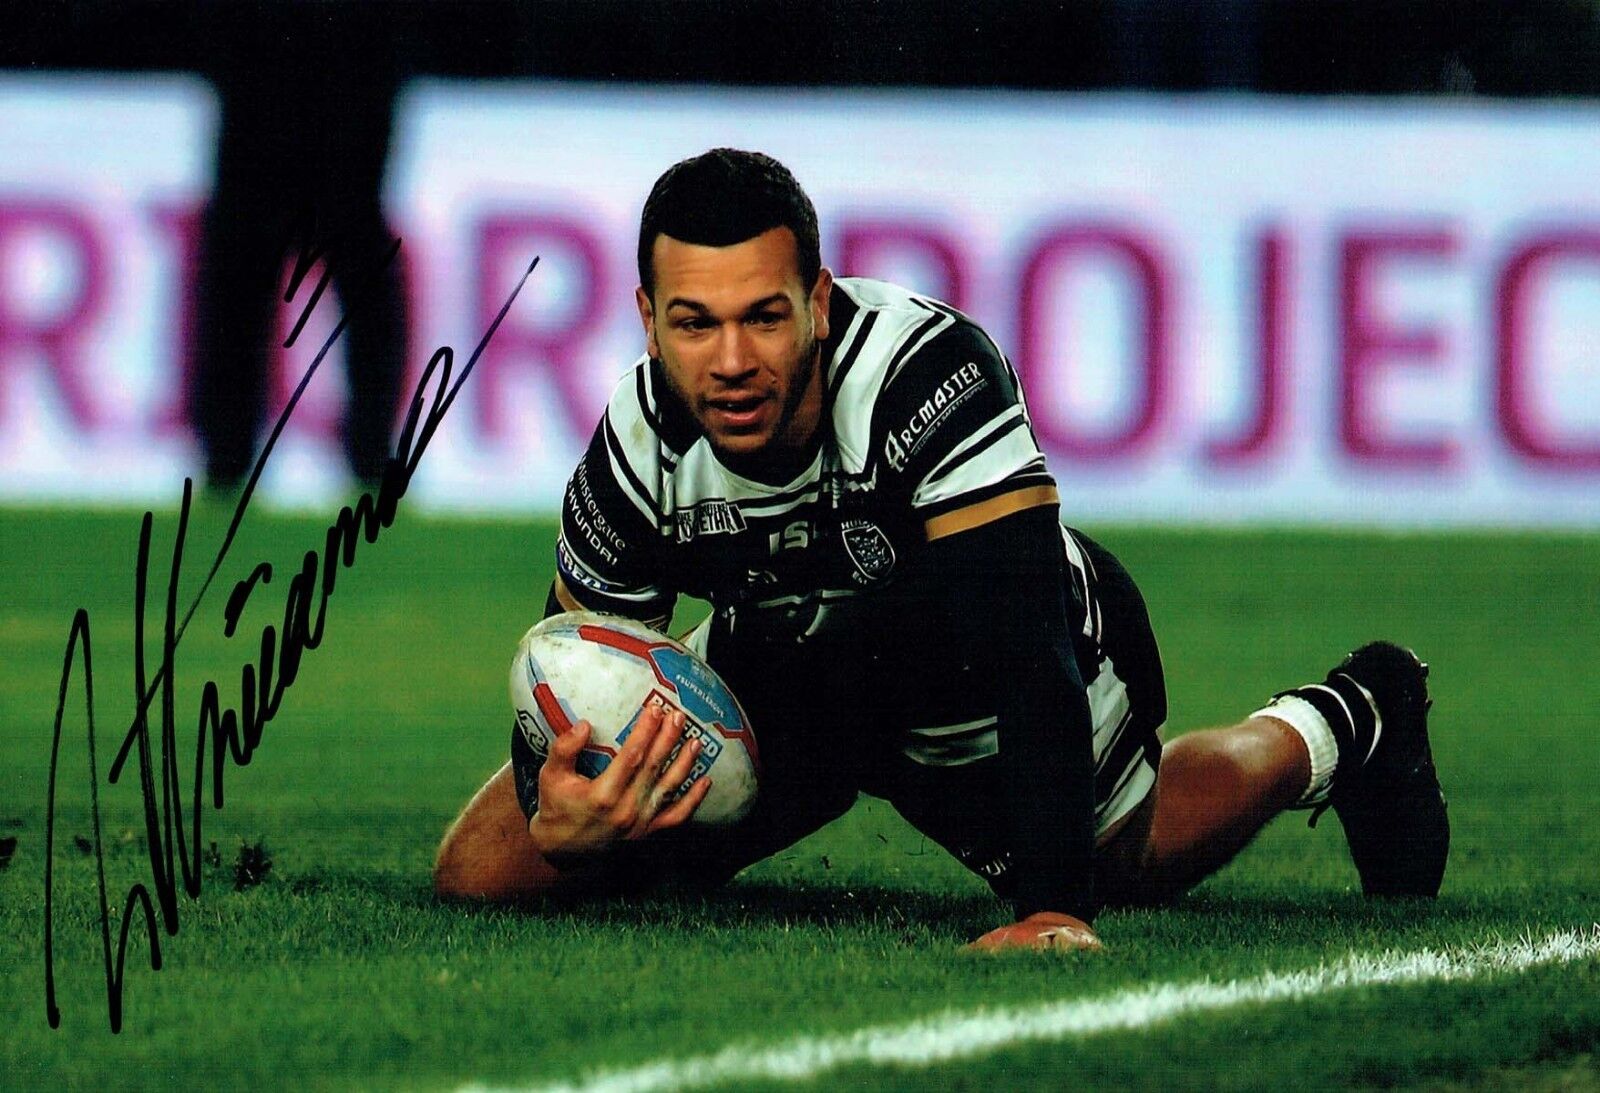 Carlos TIUMAVAVE 2018 HULL FC Rugby Signed Autograph 12x8 Photo Poster painting 1 AFTAL COA